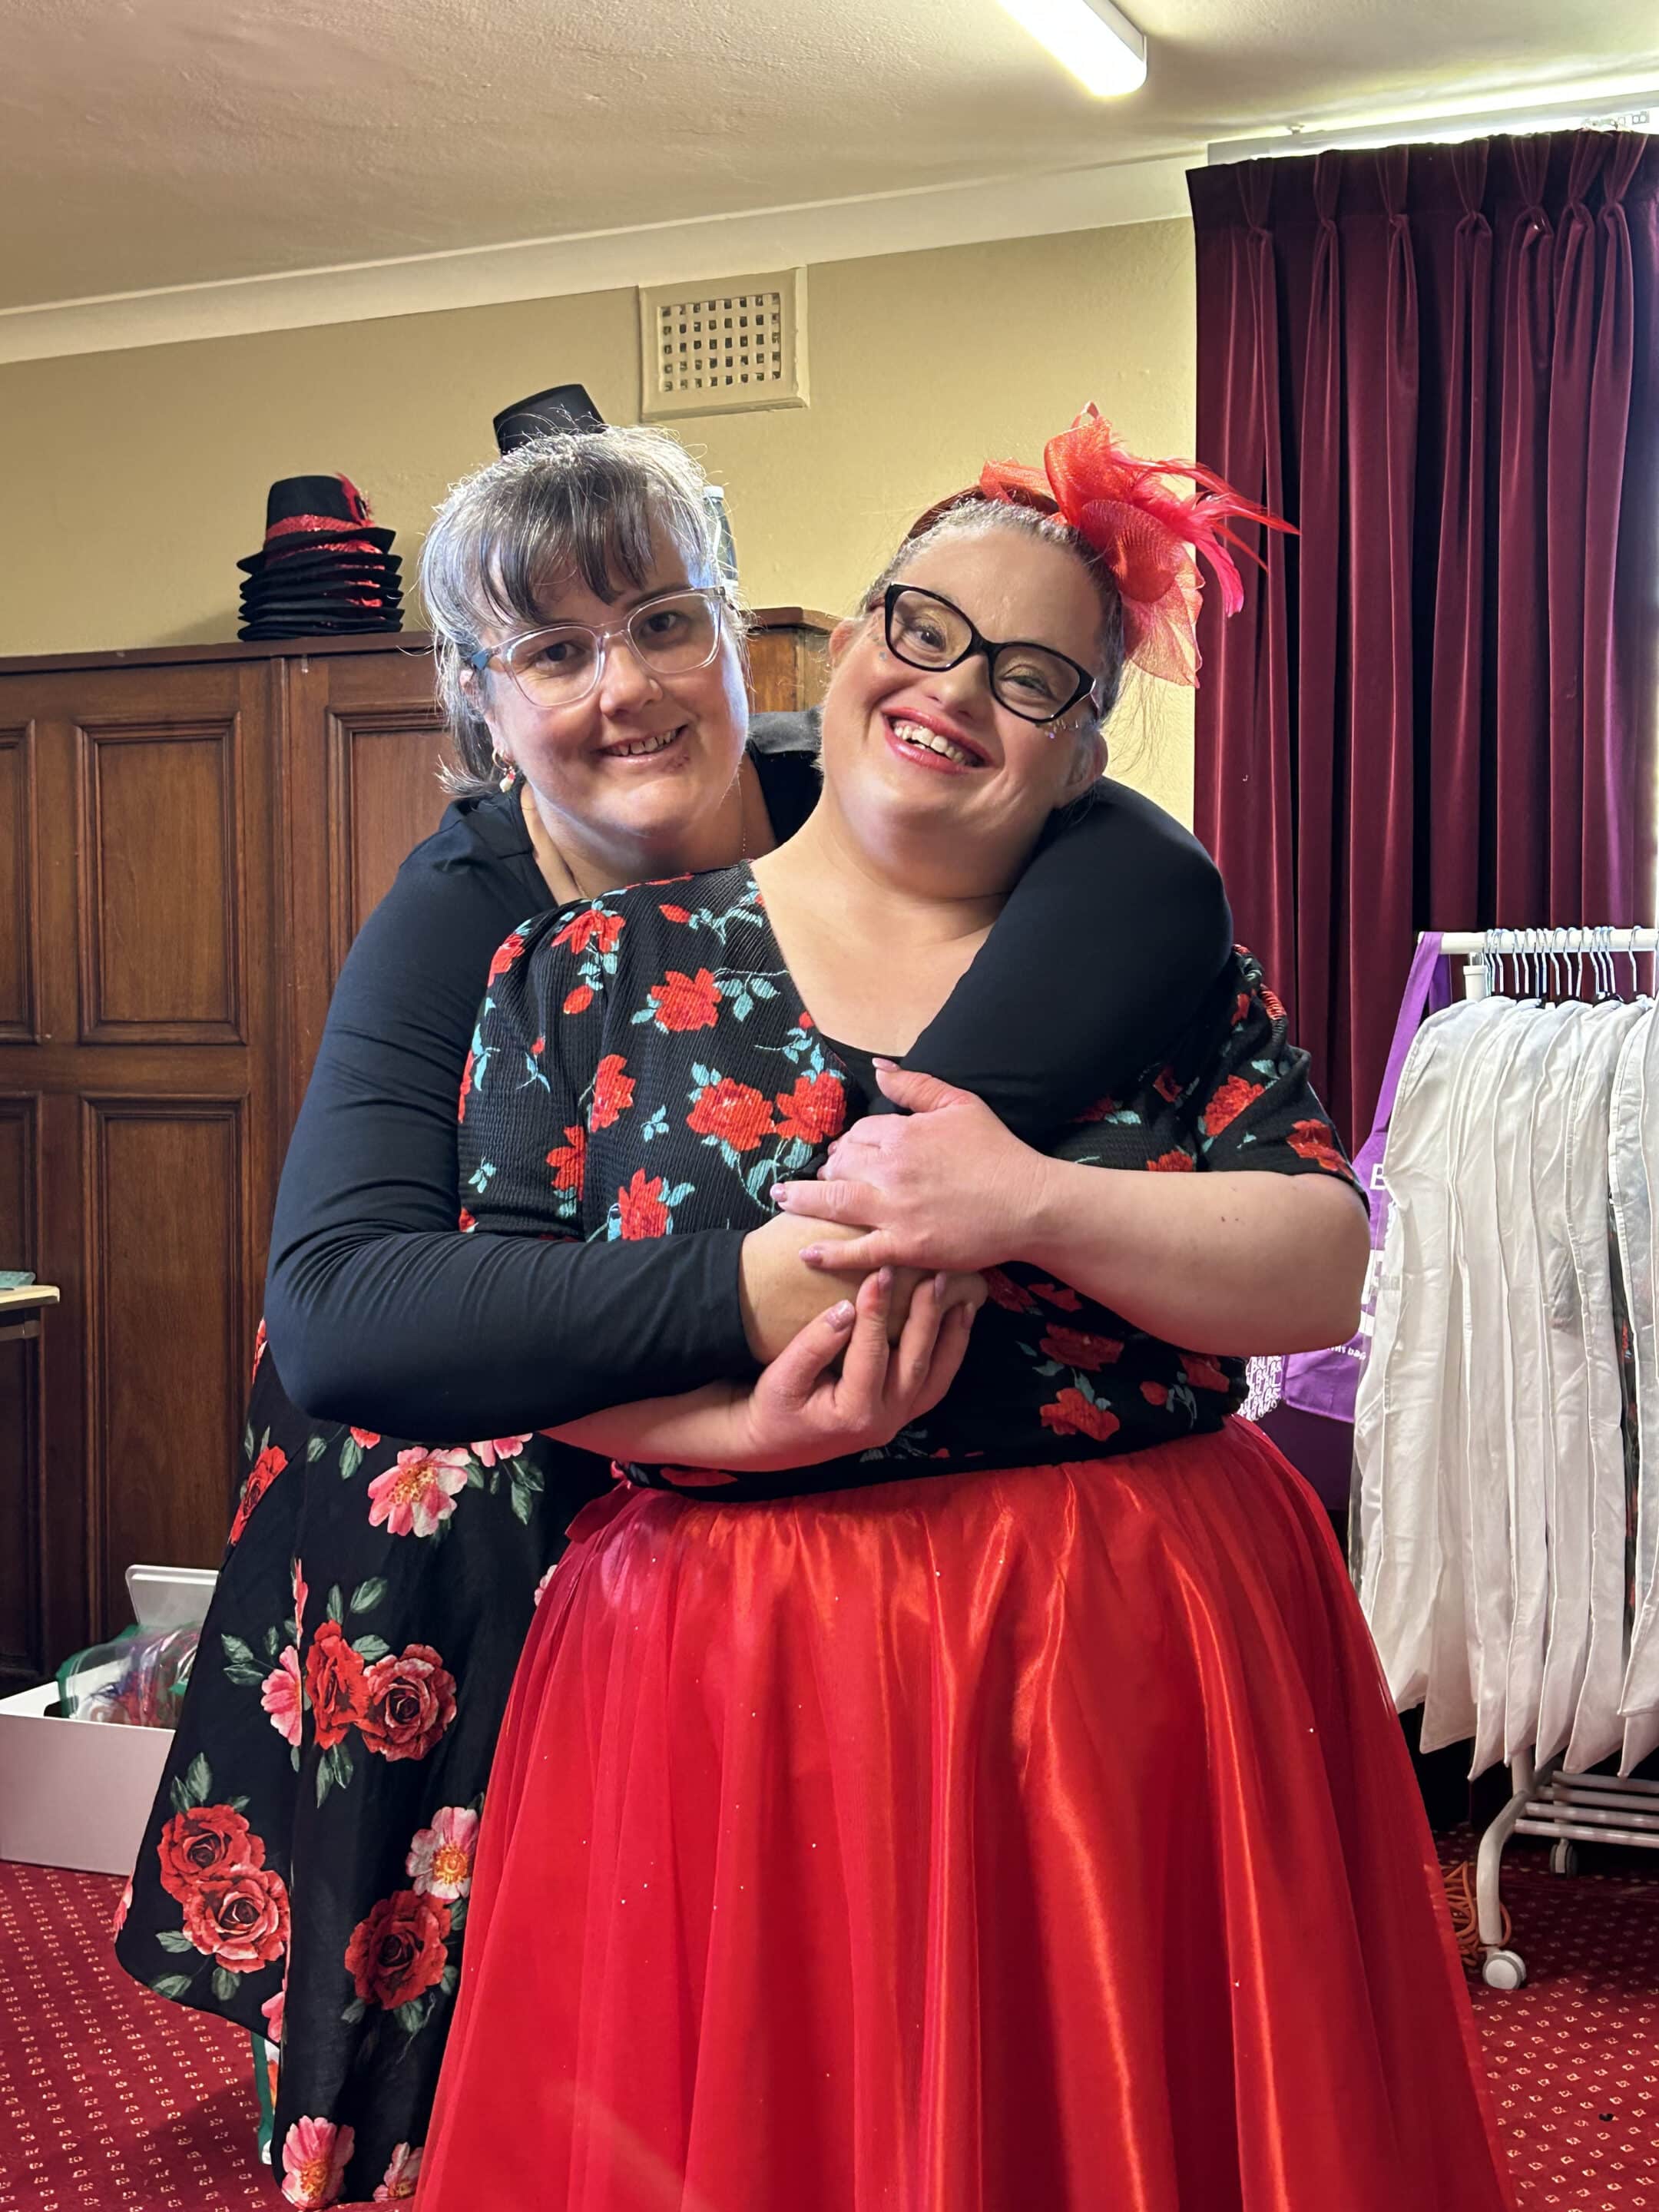 Woman with Down syndrome, wearing a dance costume, being hugged by her mother.